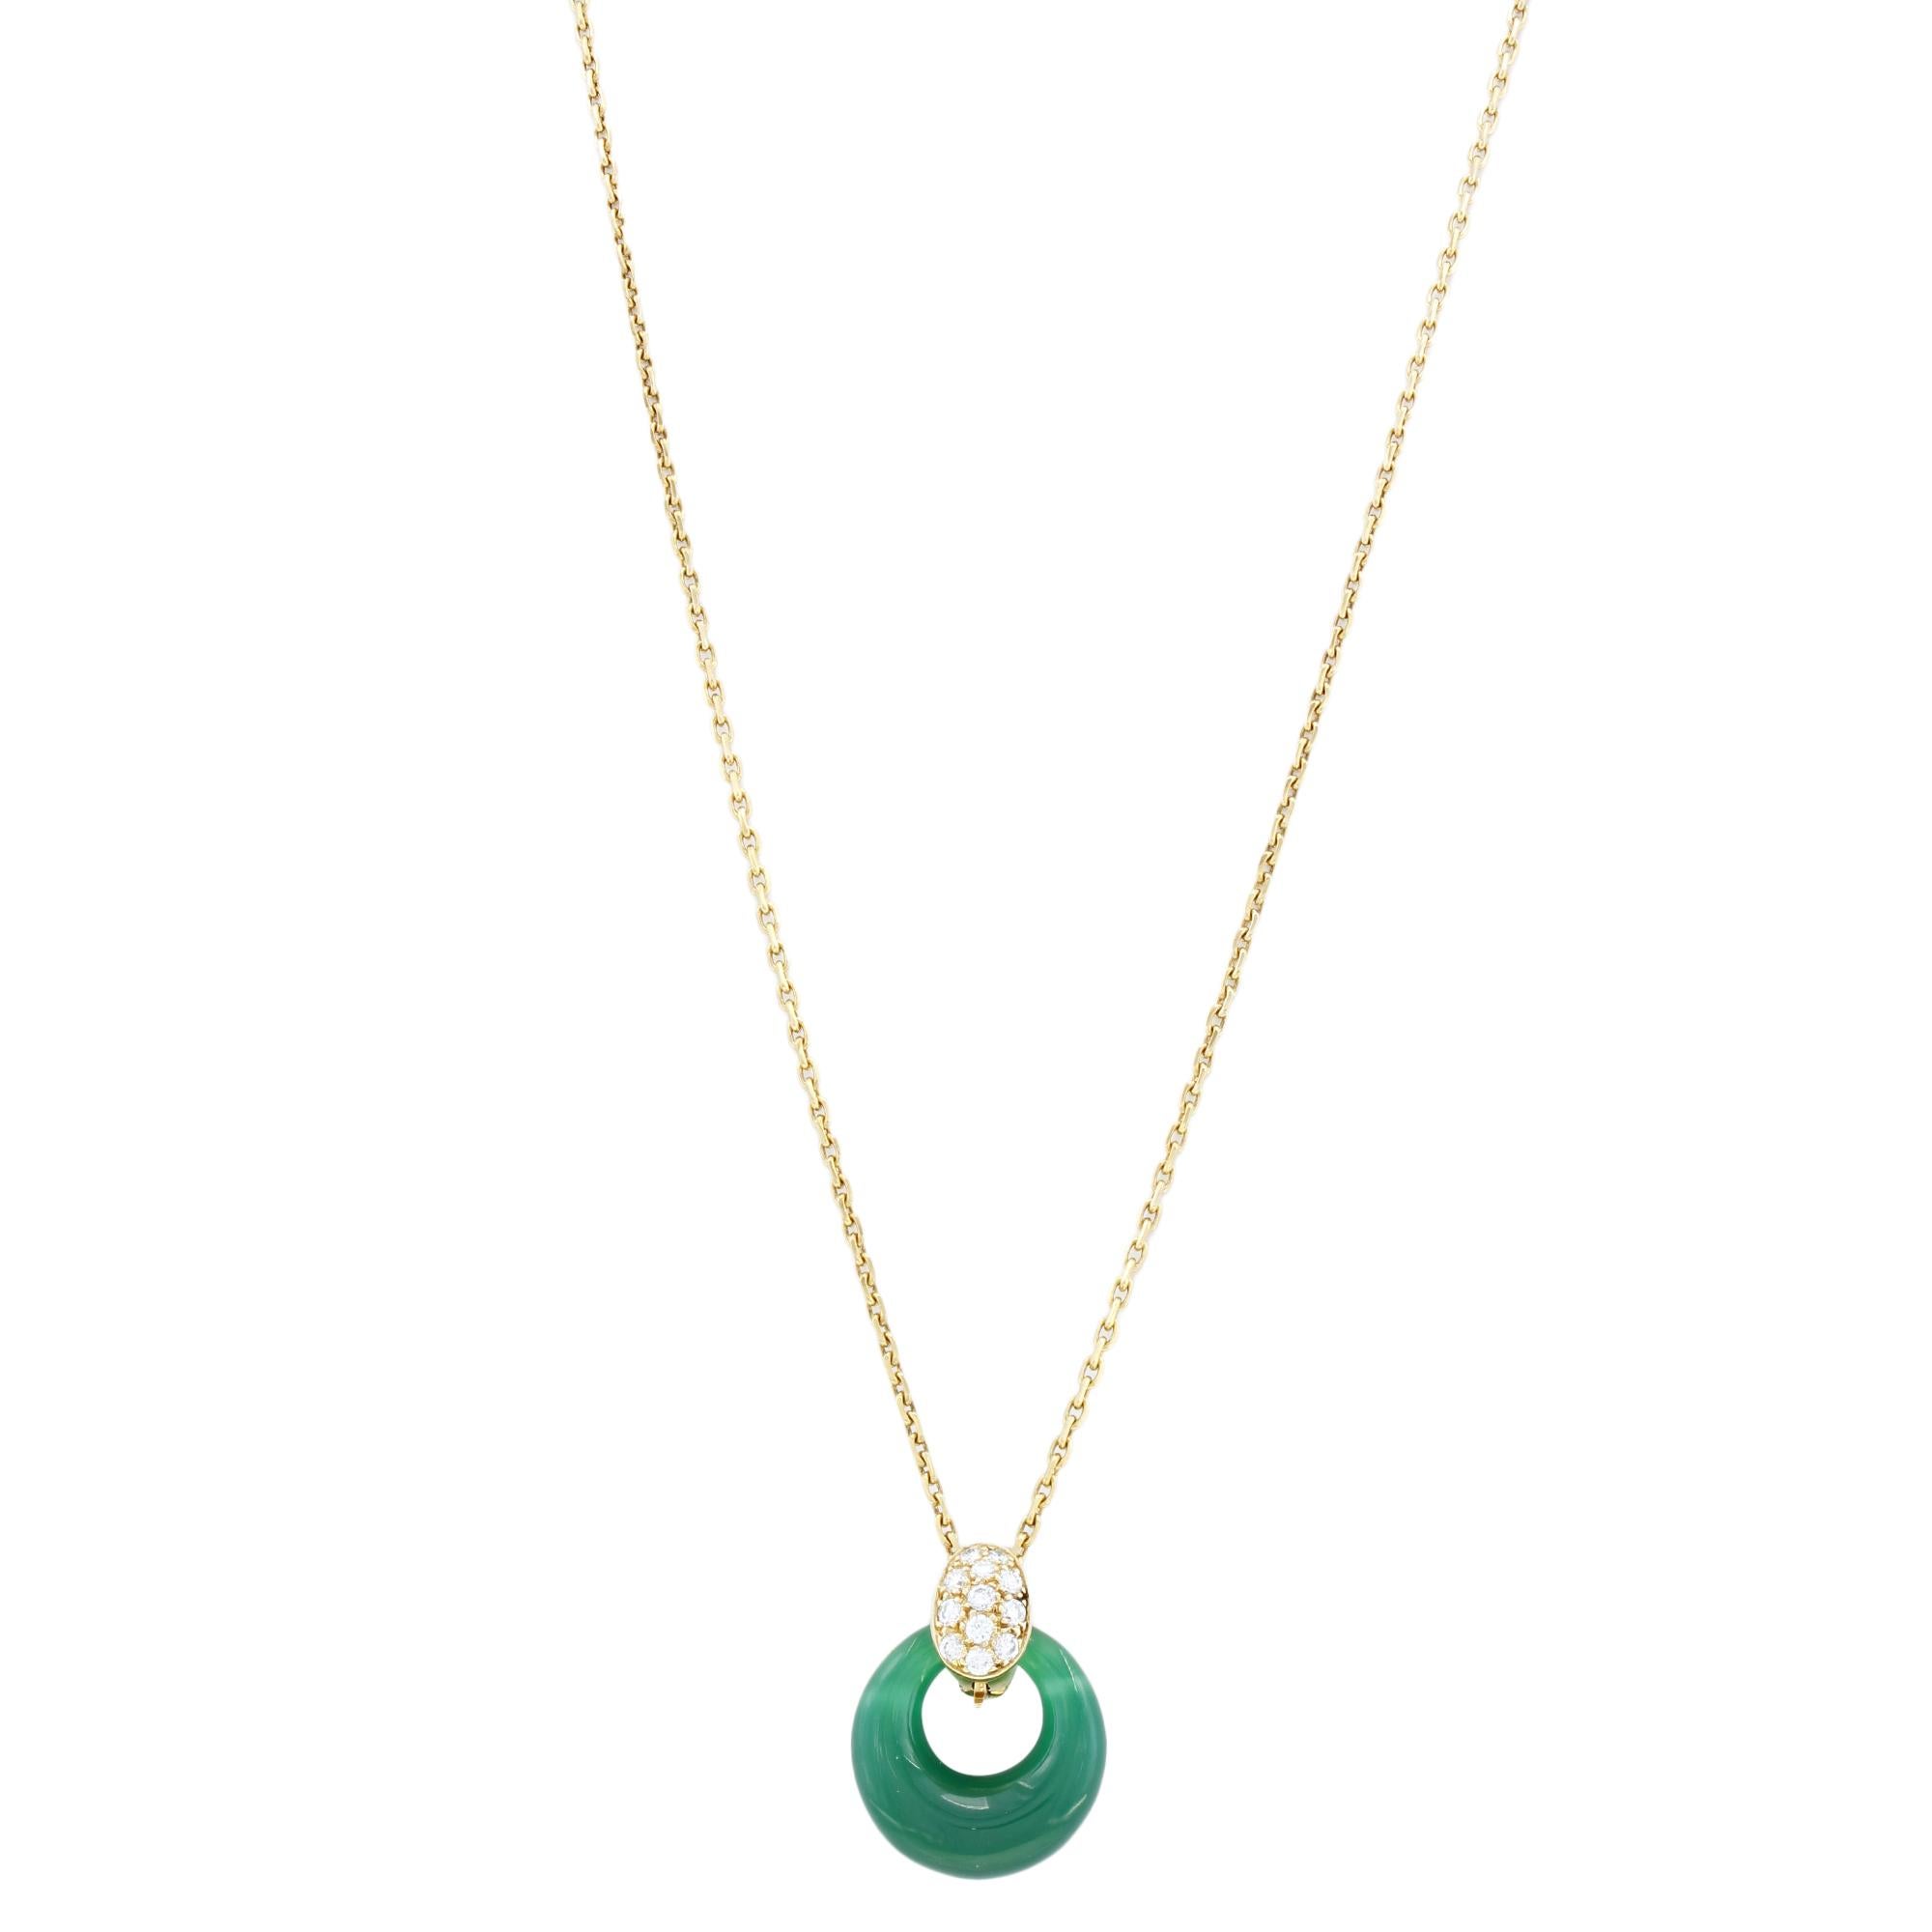 Van Cleef & Arpels Diamond Green Chalcedony Yellow Gold Pendant Necklace

This classic circa 1980s Van Cleef & Arpels necklace is crafted in 18k yellow gold and features a versatile pendant enhancer set with brilliant-cut round diamonds of an